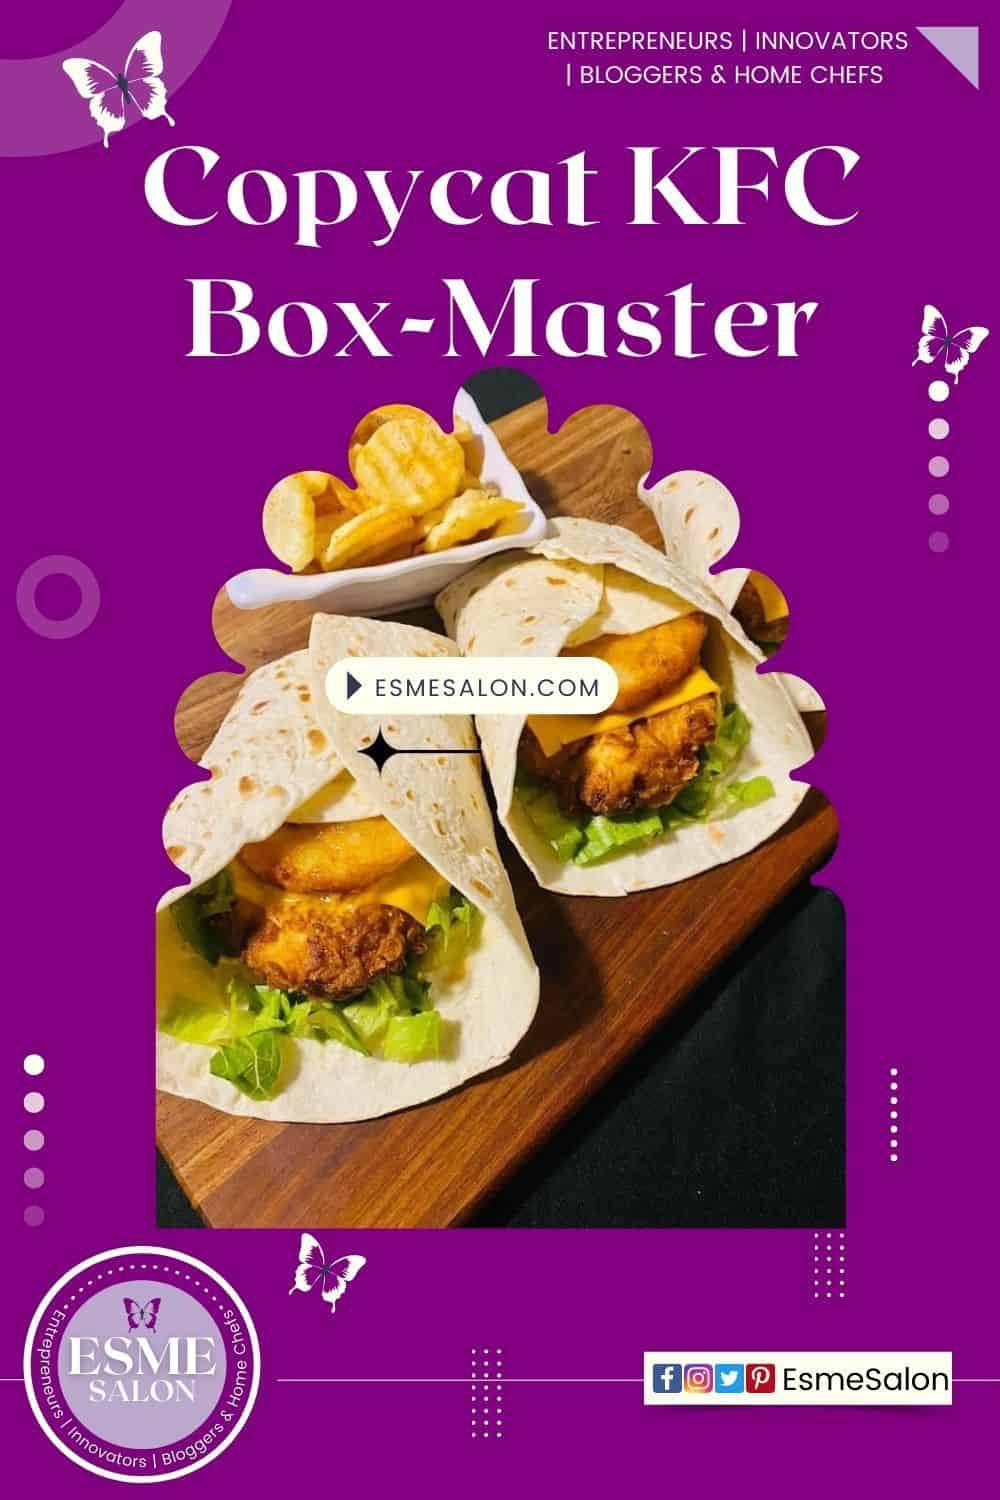 KFC Box-Master made with breaded chicken fillets